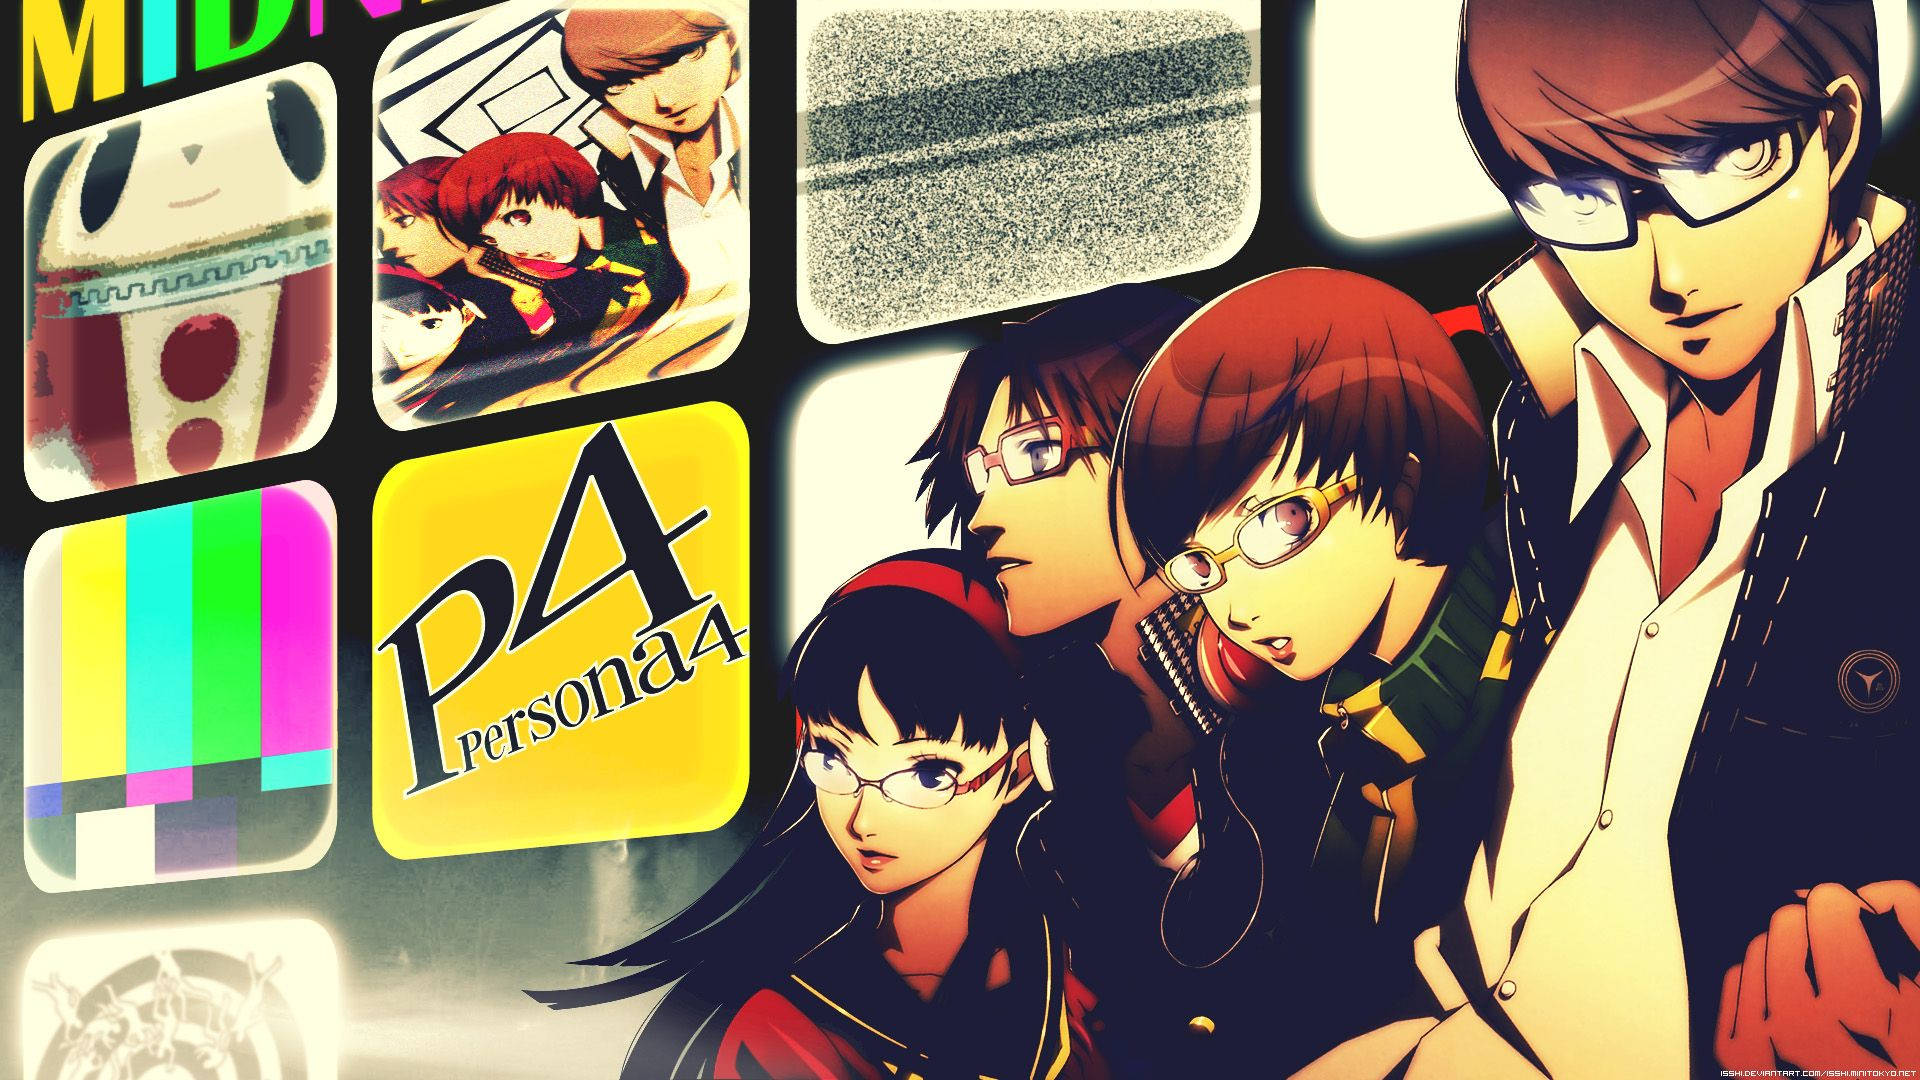 The hero's journey begins in the eerie Midnight Channel of Persona 4. Wallpaper